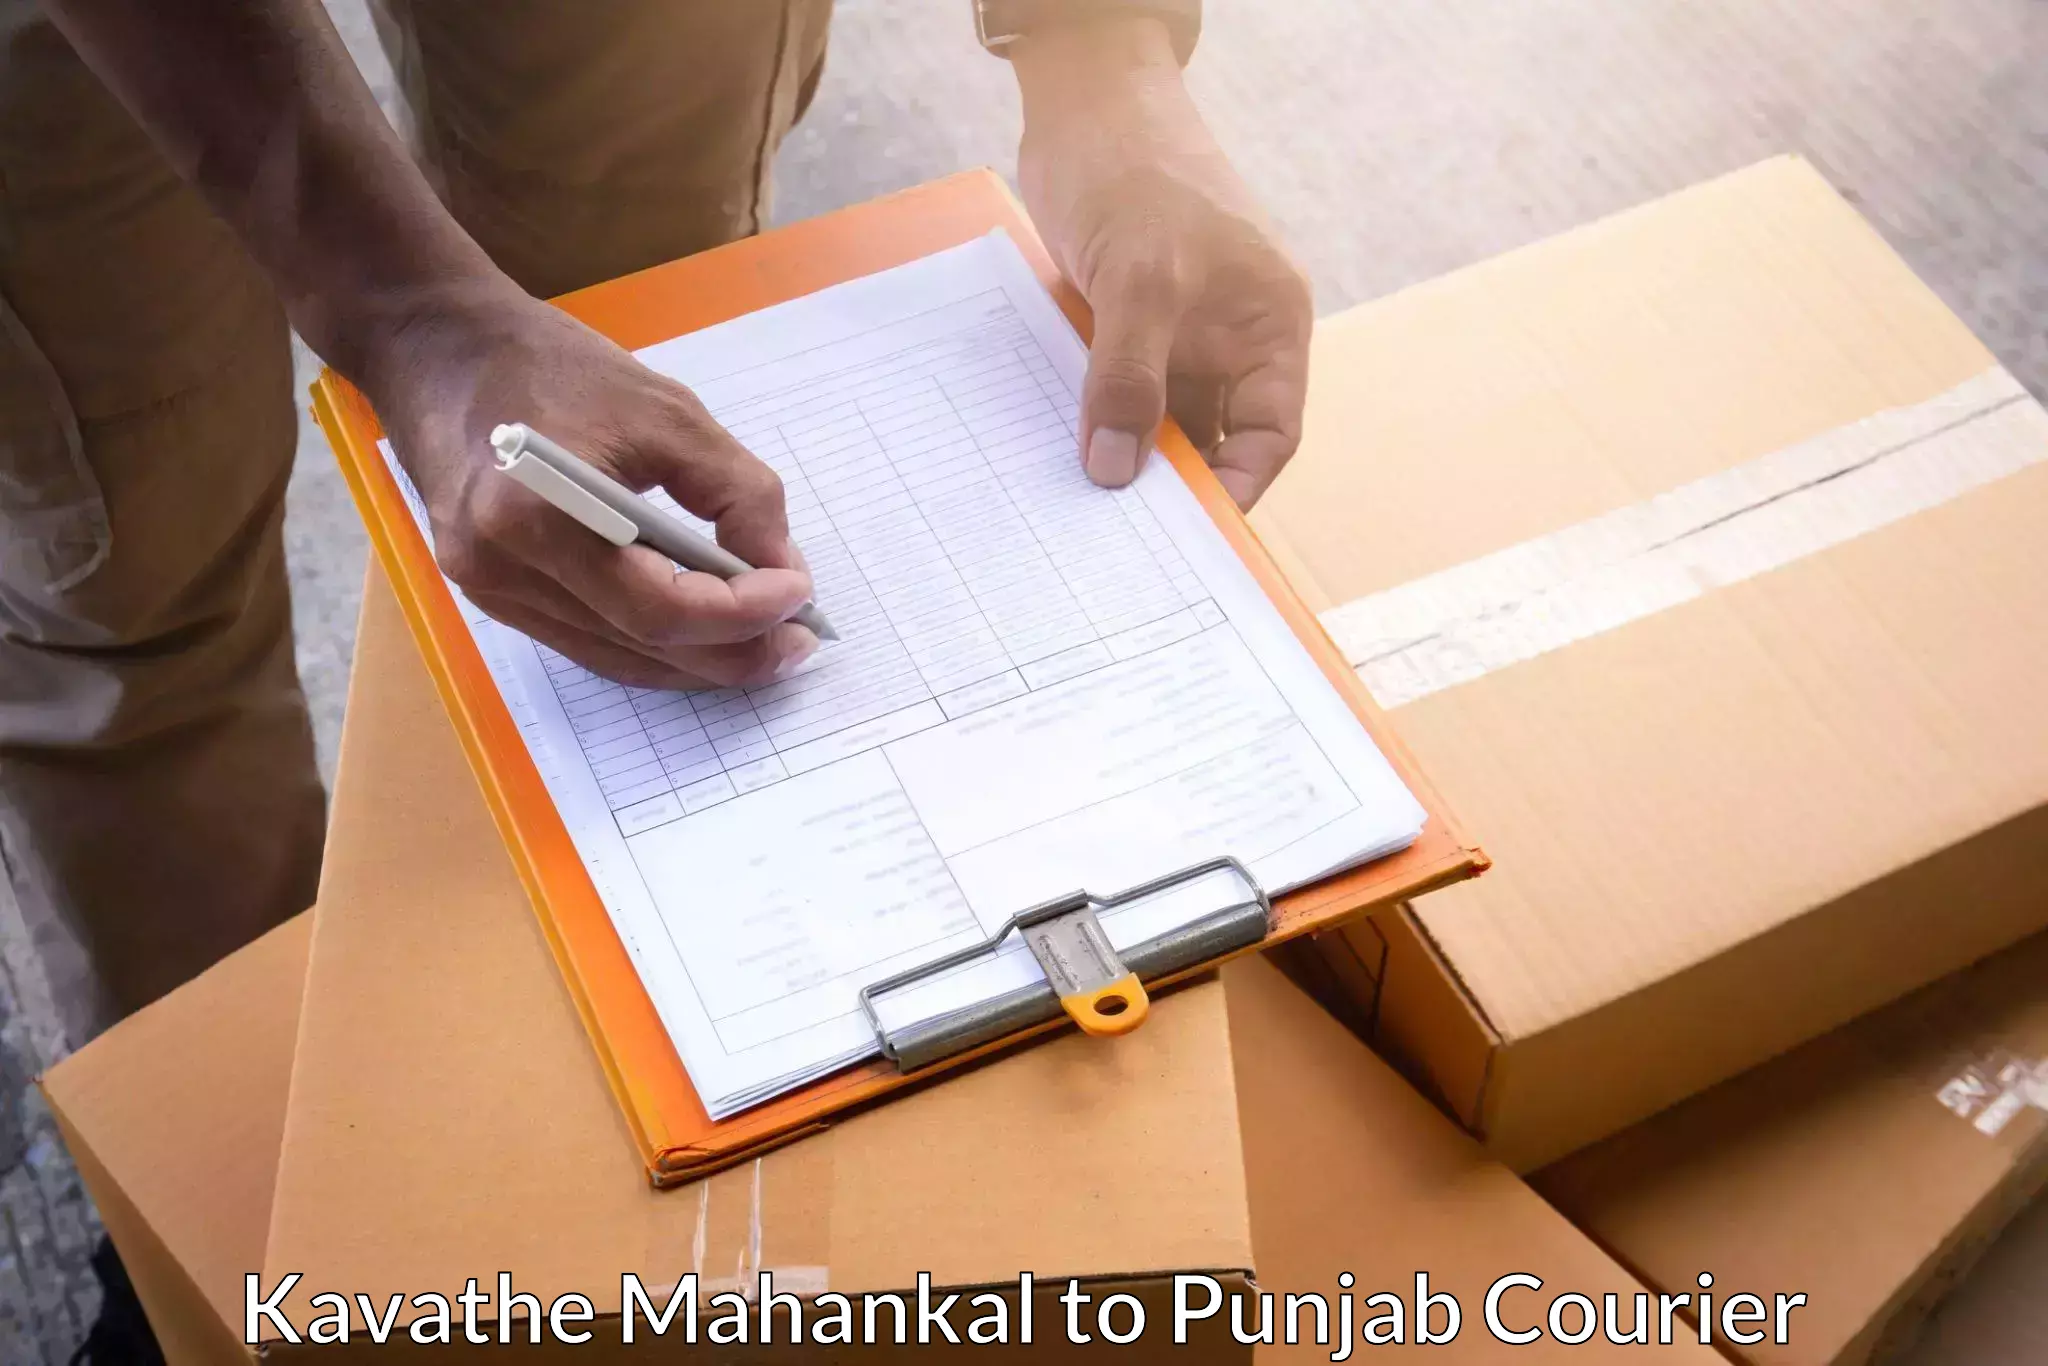 Nationwide shipping capabilities in Kavathe Mahankal to Goindwal Sahib